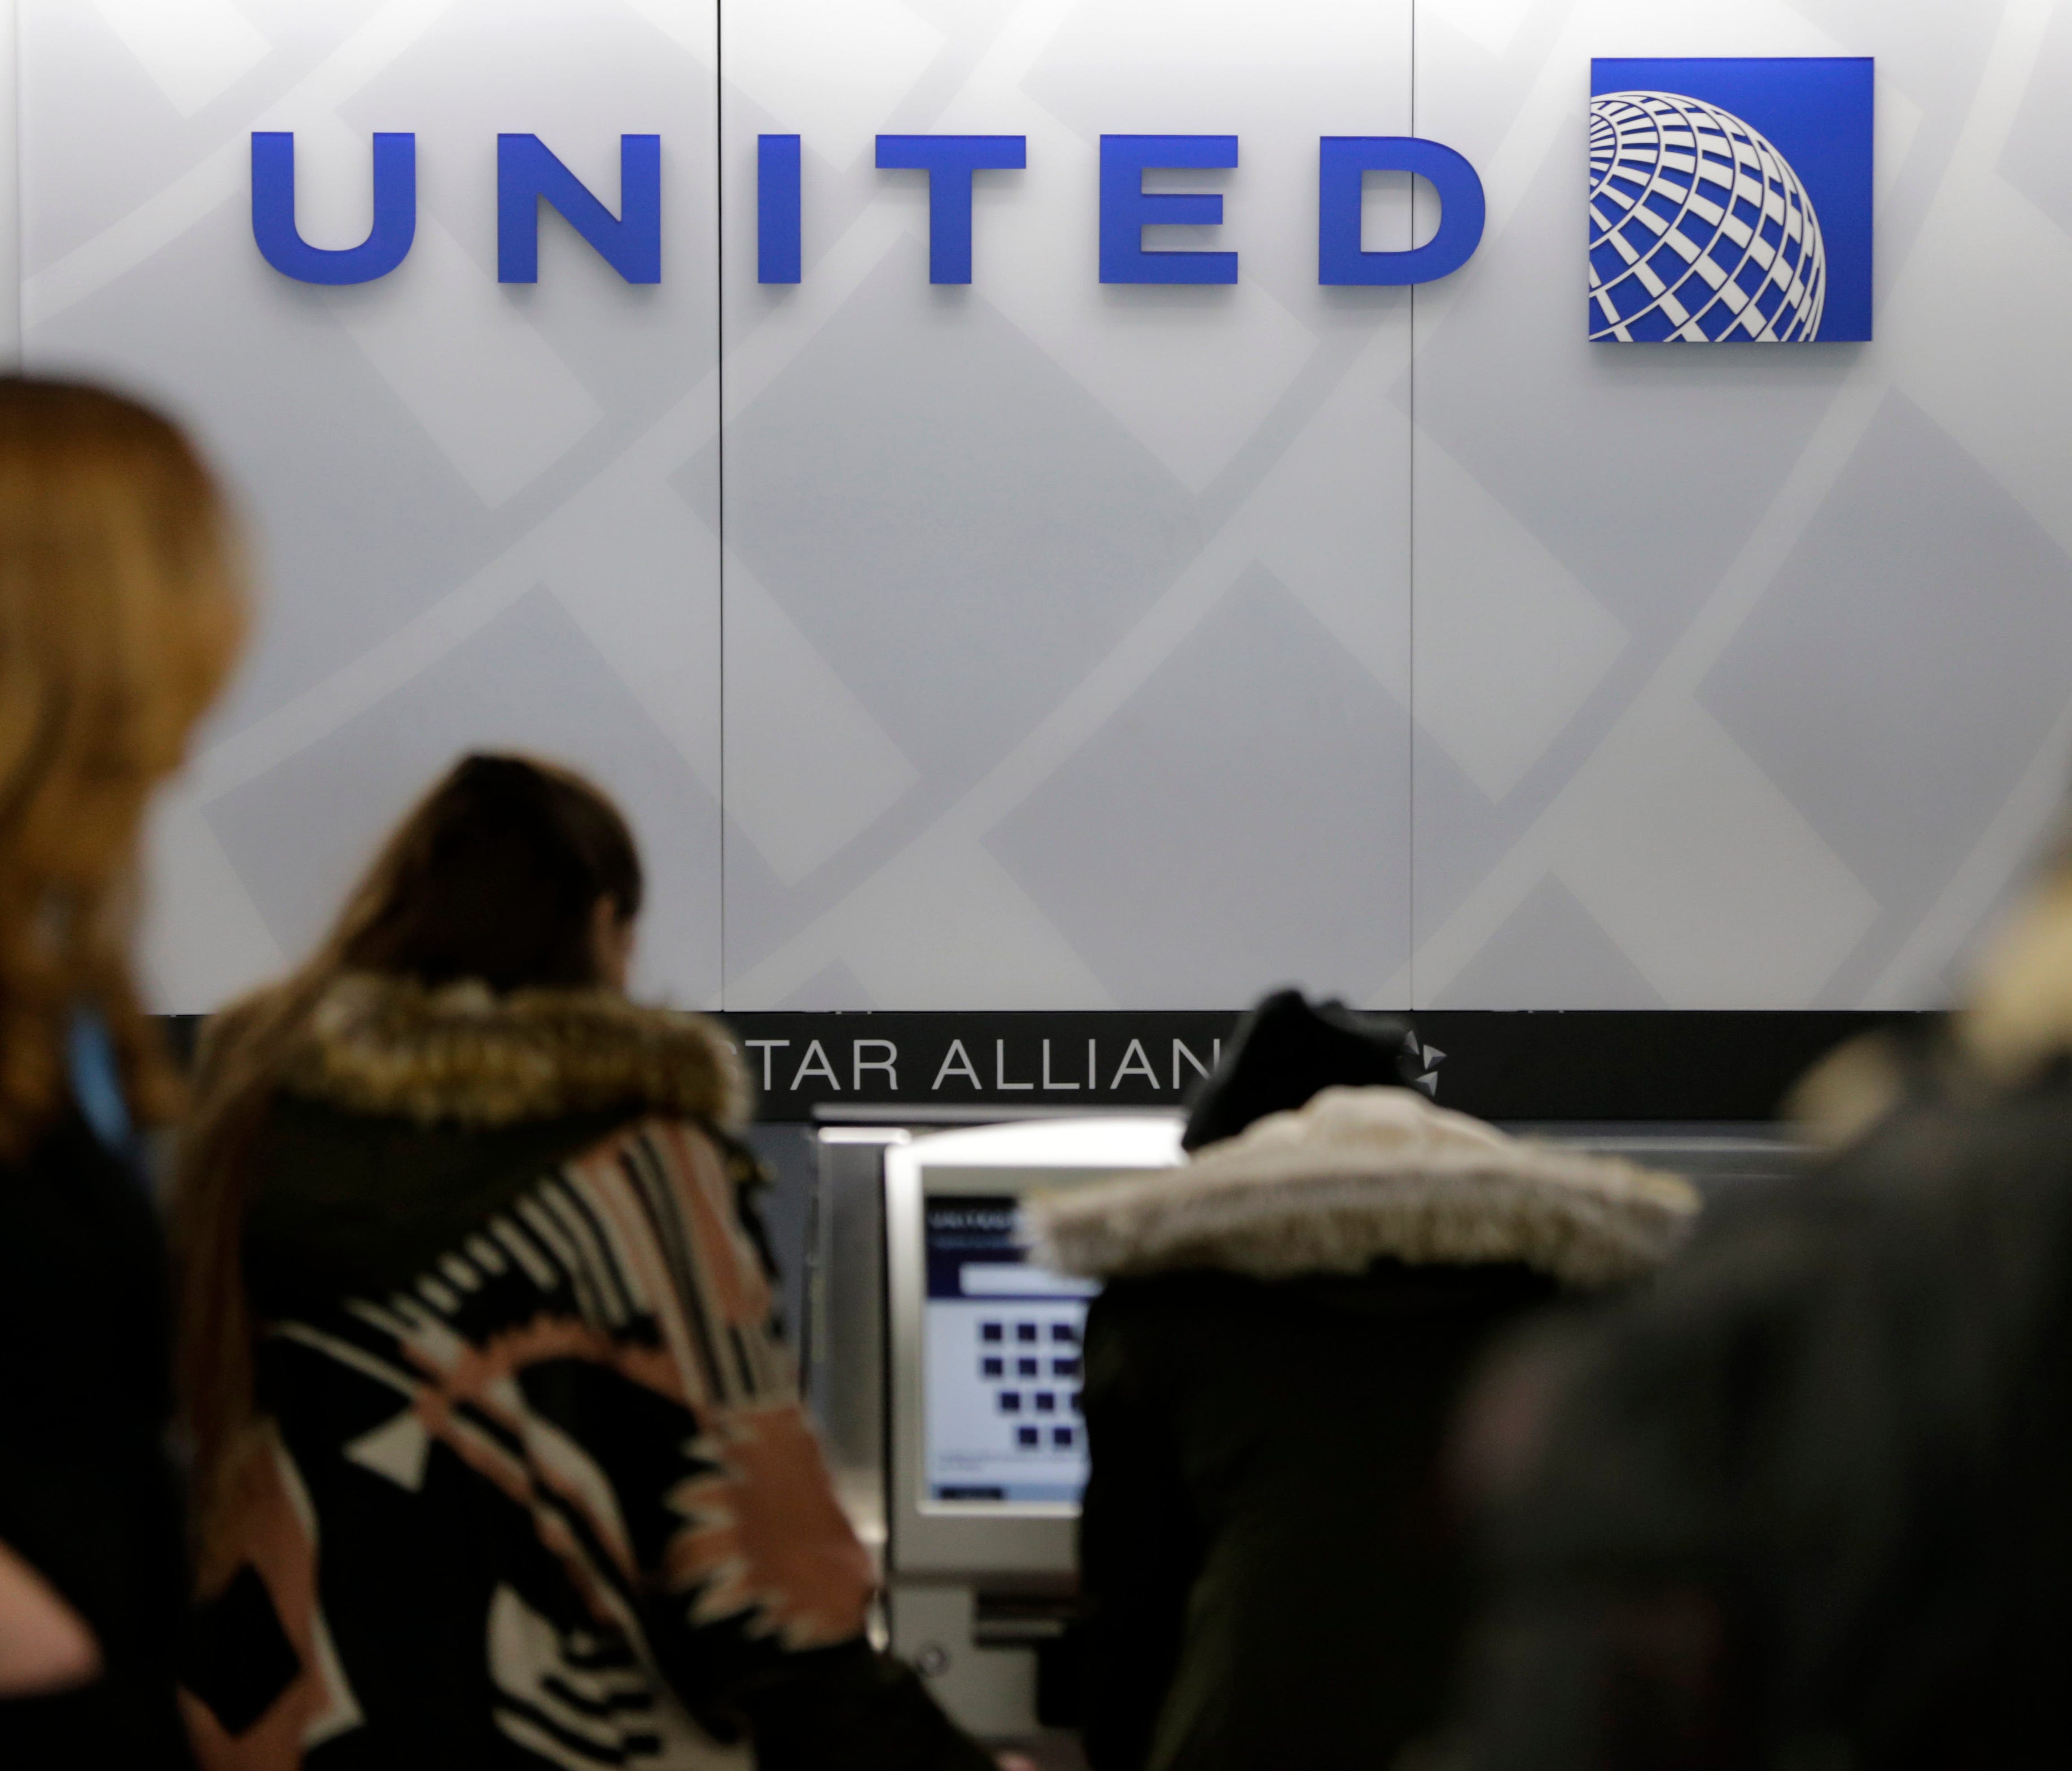 United Airlines is under fire on Twitter after denying girls in leggings entry on a flight.